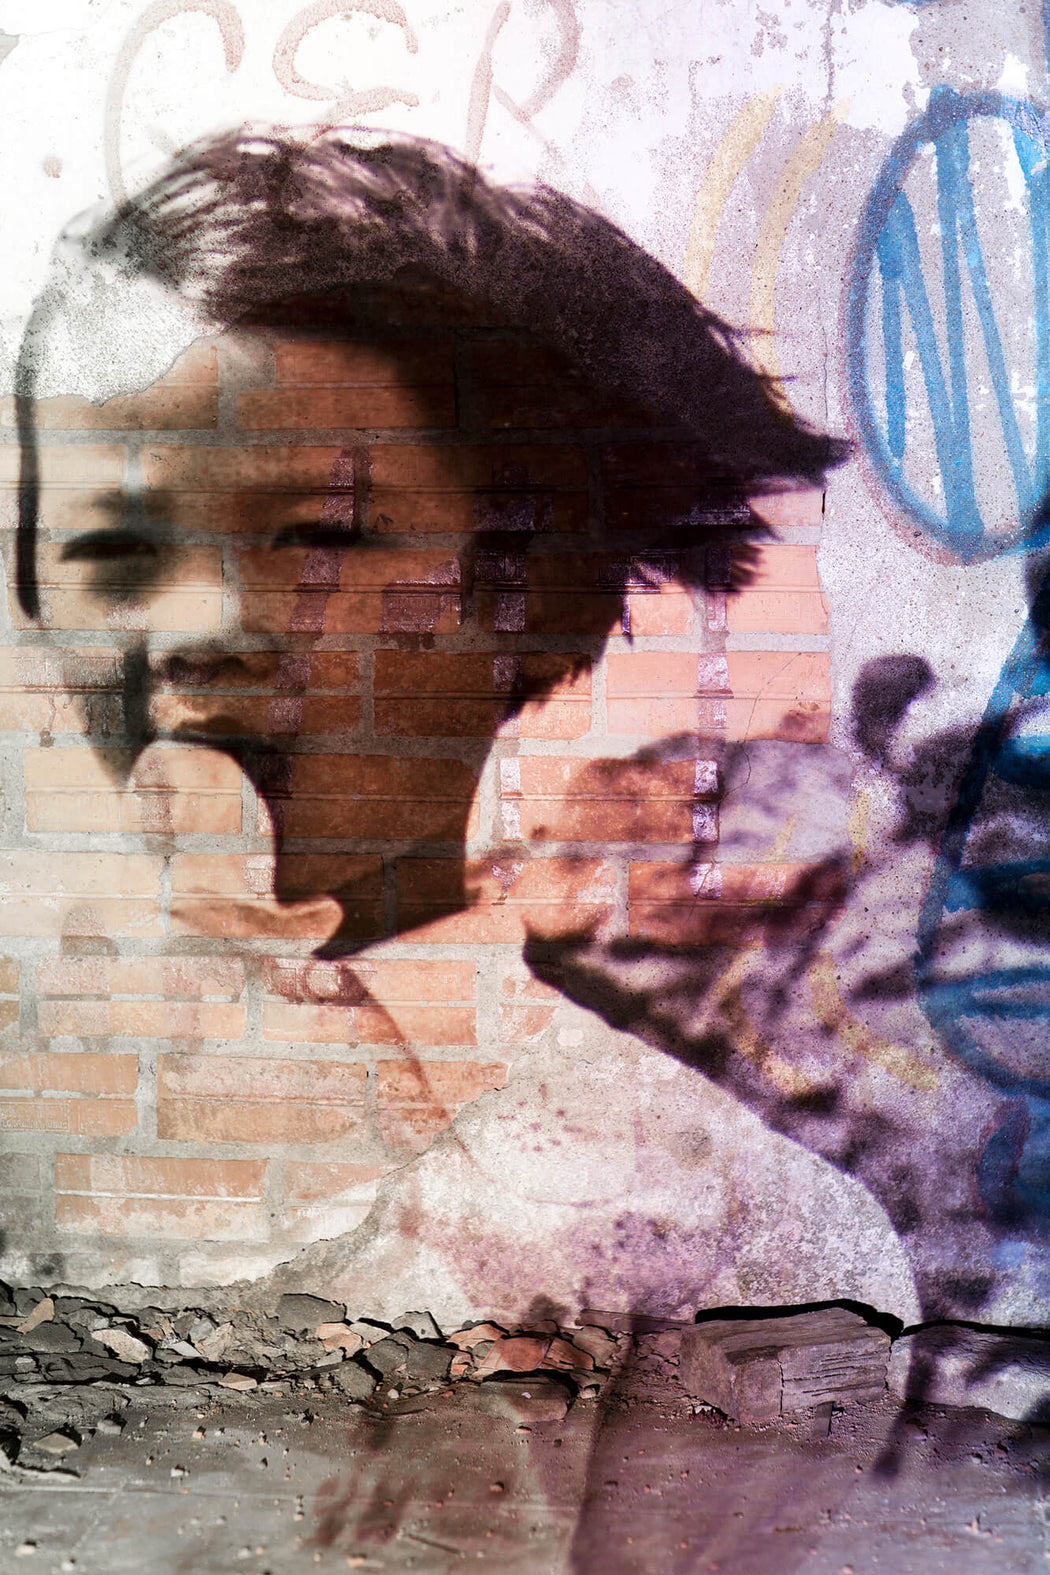 FFOTO-Olivia Marty-Daddy, Why Must This War Be? (projected on a graffiti wall in an abandoned house, in Tran Nao, Saigon)